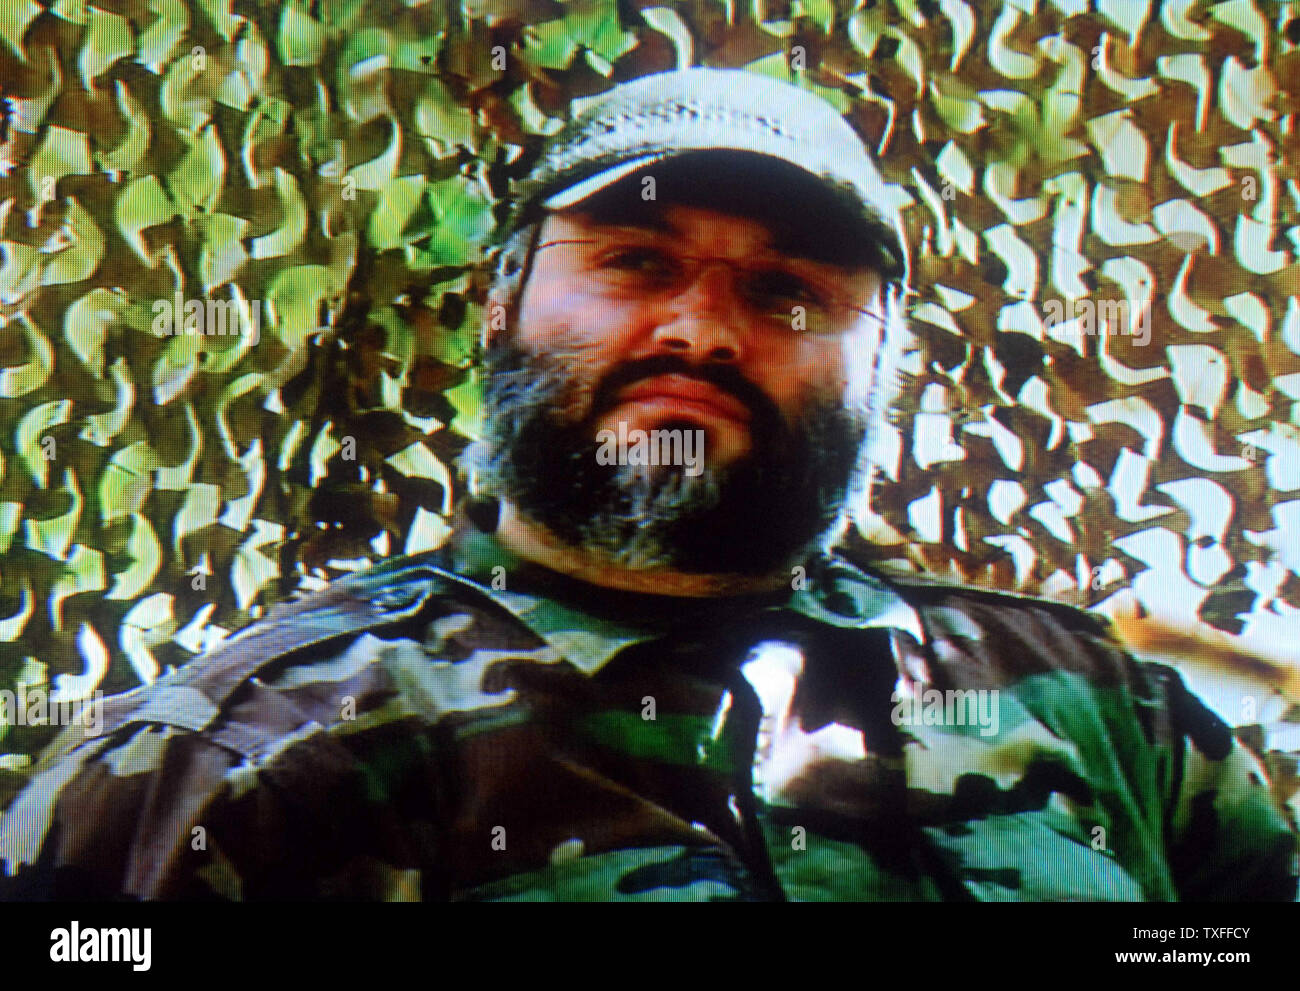 File photo of Imad Mughniyeh, the elusive Hezbollah operative, who was killed in Damascus on Tuesday February 12 by a bomb. Mughniyeh had been on the run from for the past three decades and has been accused of masterminding some of the most spectacular terrorist attacks on American and Israeli interests, most notably the 1983 attack on the U.S. Marine barracks in Lebanon; the TWA hijacking in 1985 and the attack on the Israeli embassy in Argentina to name a few. His funeral is on Thursday February 14 in Beirut. (UPI Photo/Al Manar TV) Stock Photo